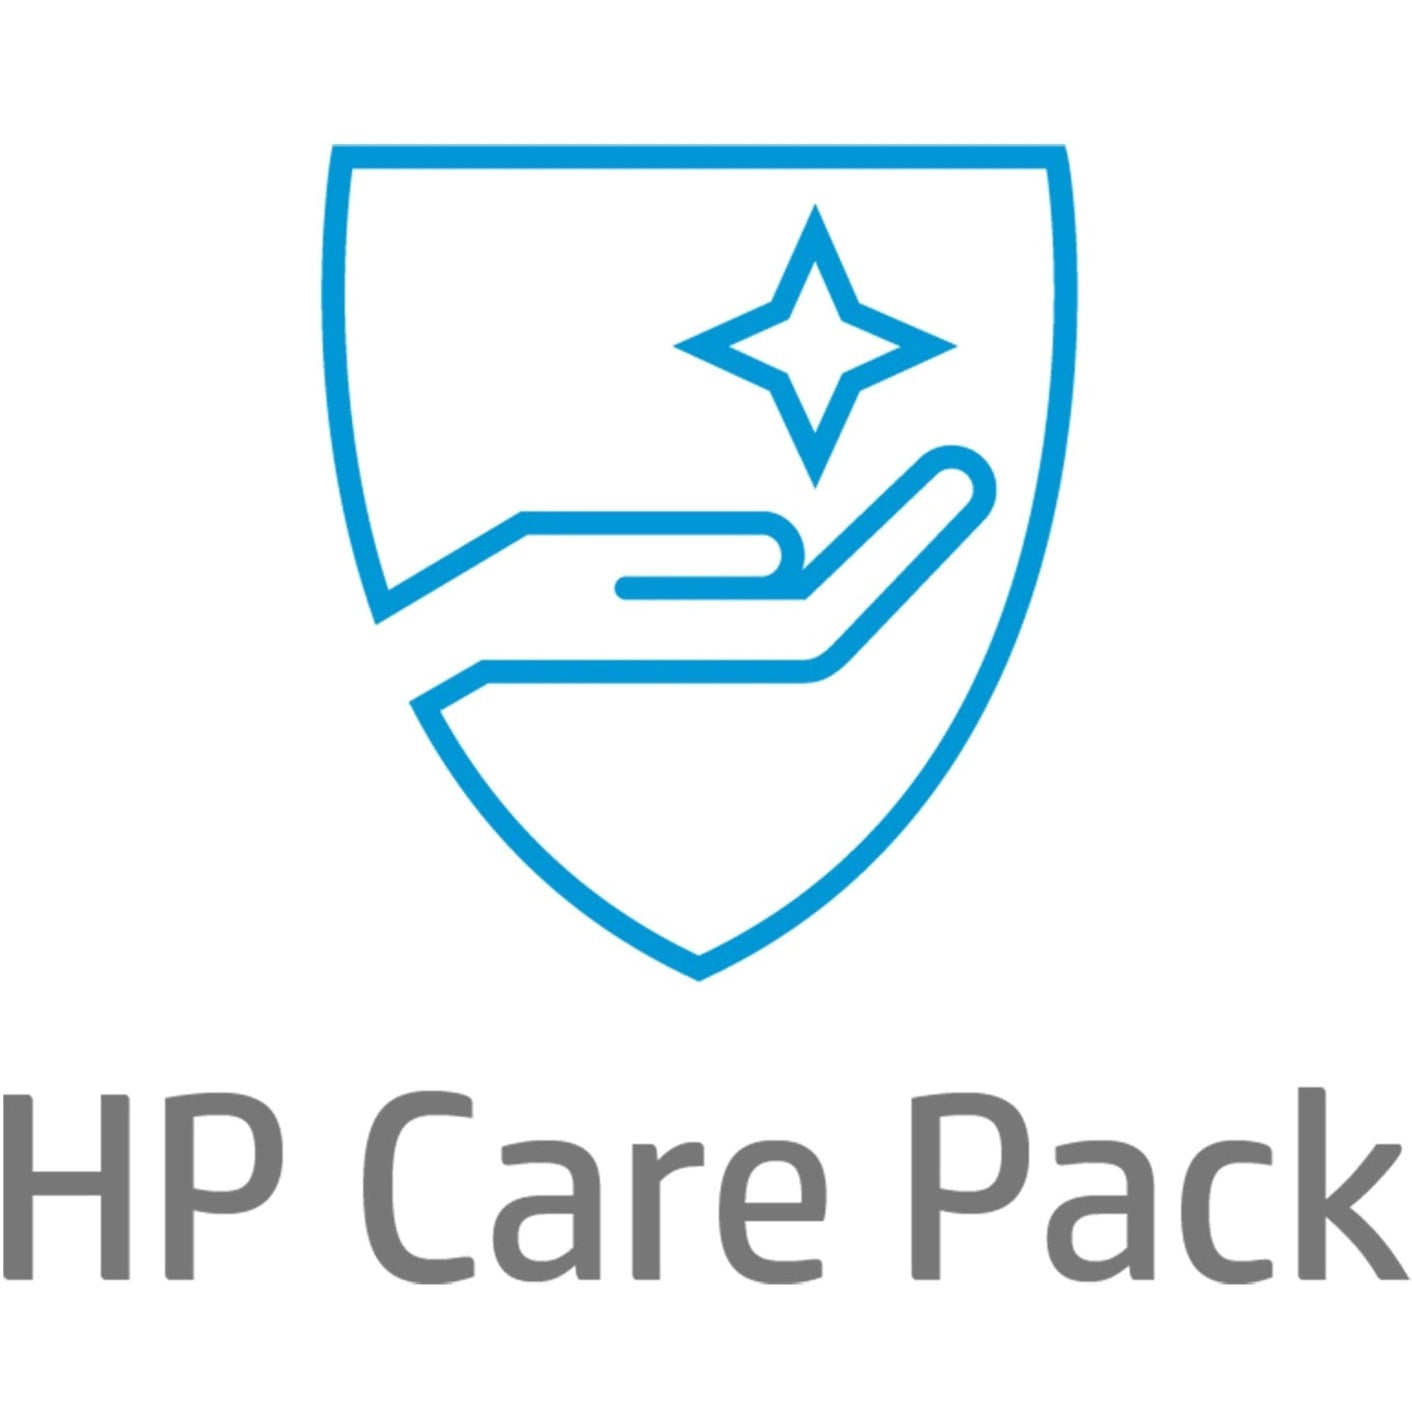 HP Care Pack Hardware Support with Accidental Damage Protection - 1 Year - Service (UK724E)